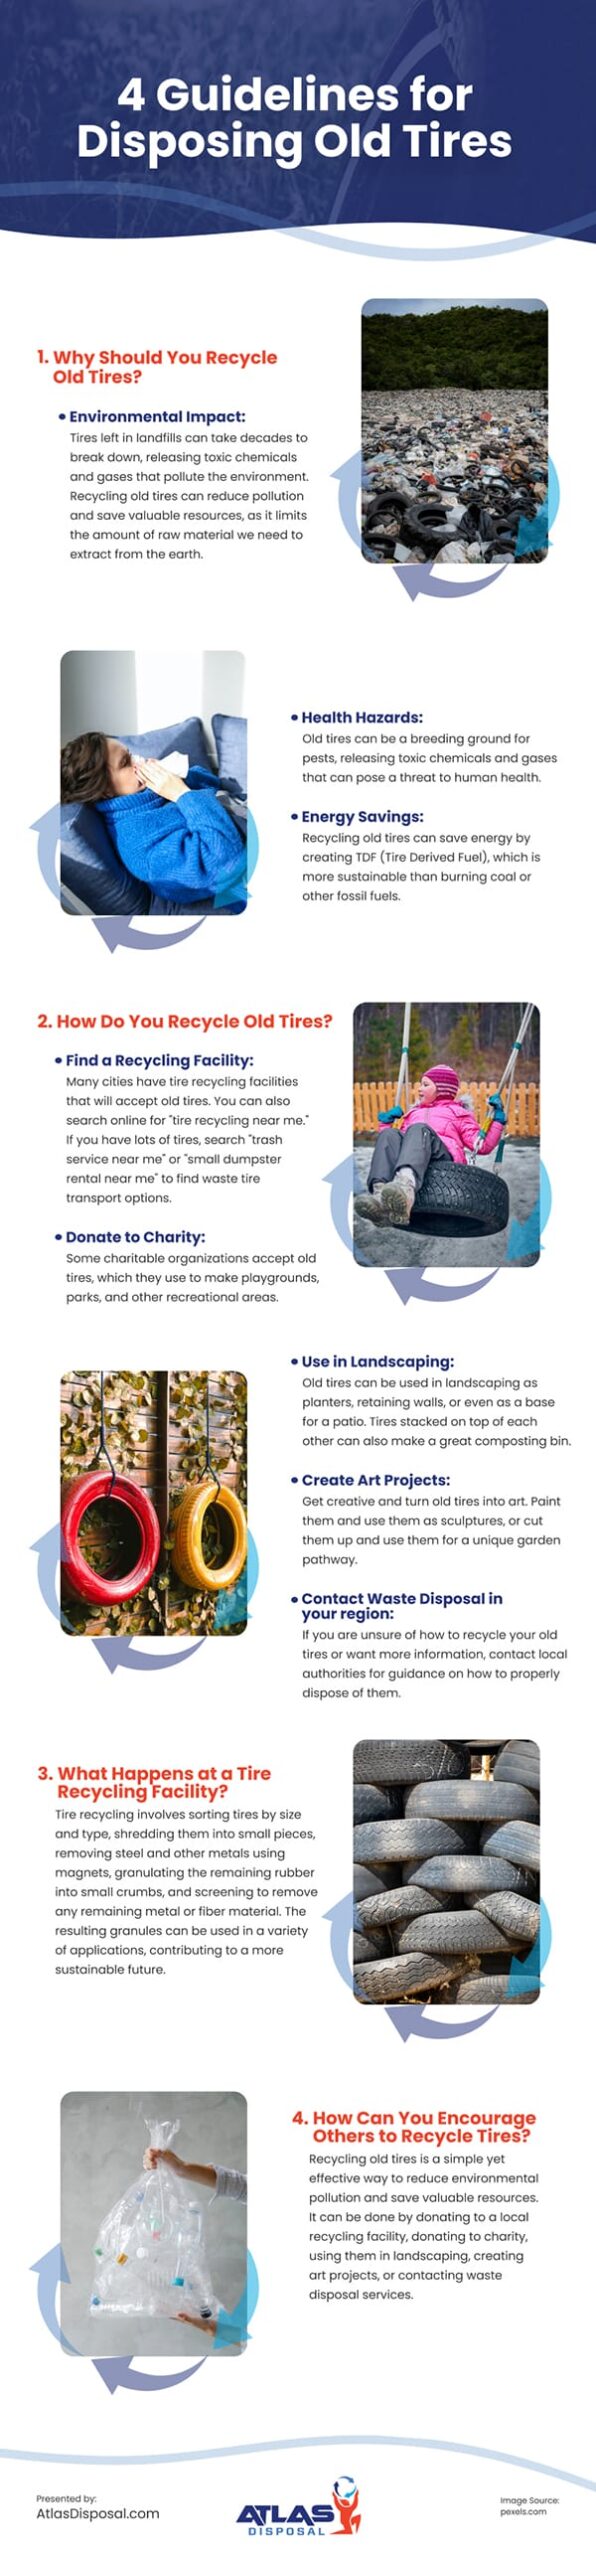 4 Guidelines for Disposing Old Tires Infographic